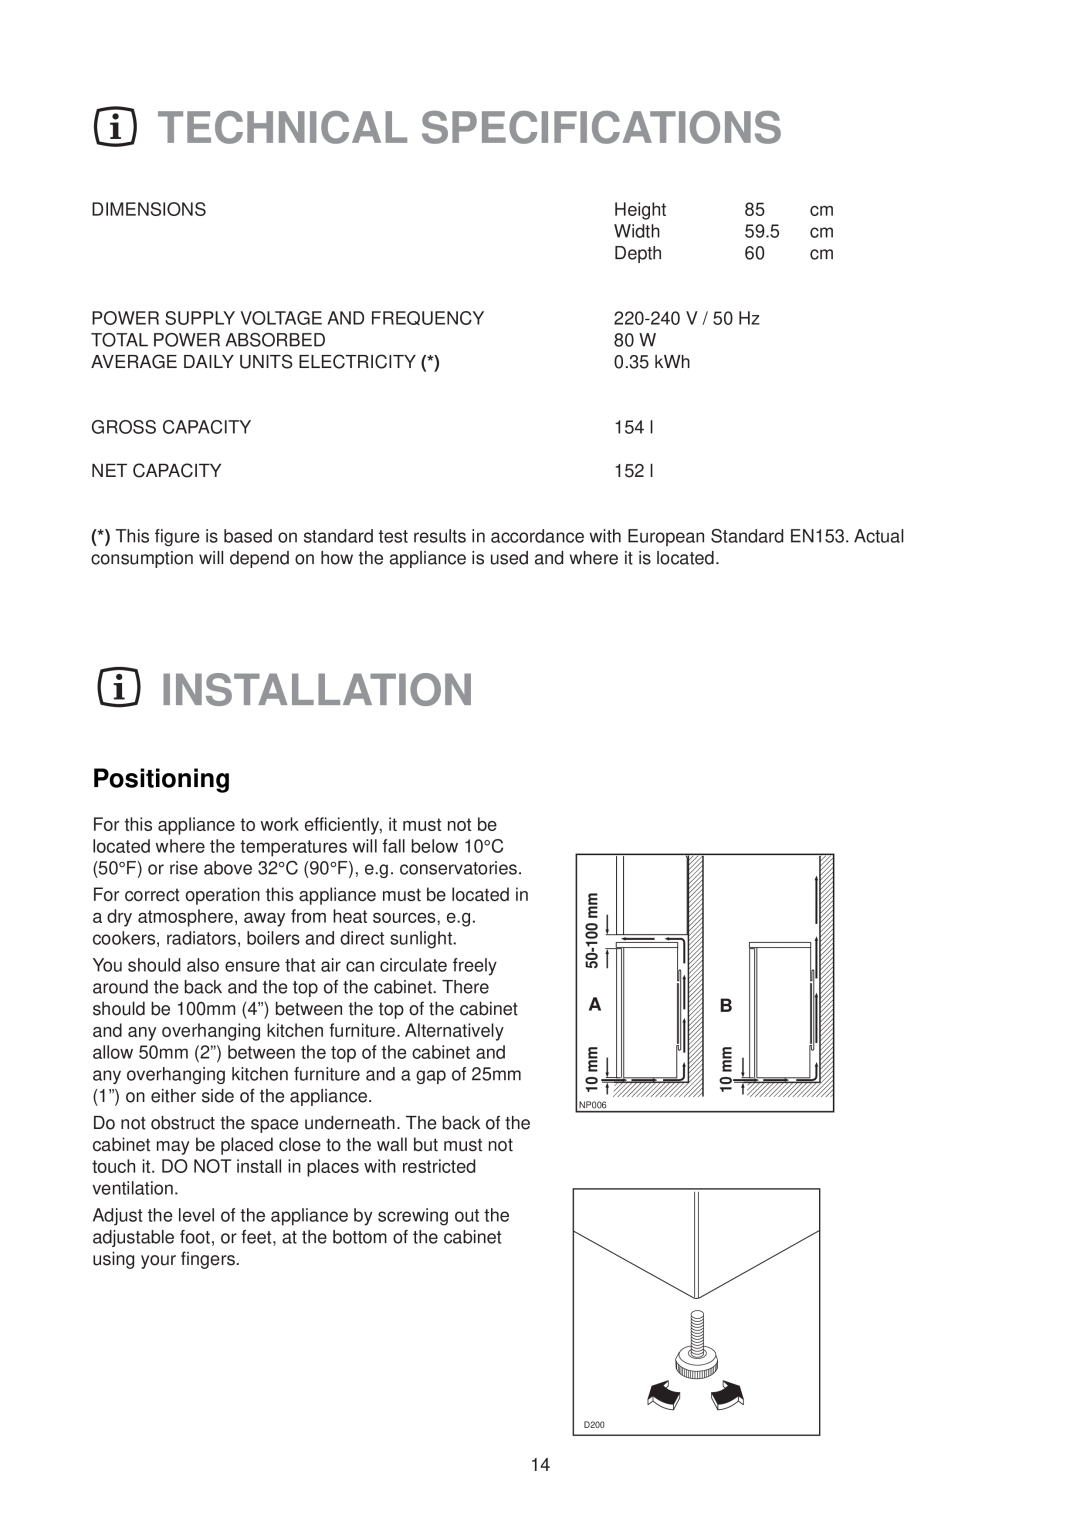 Electrolux ER 6639 T manual Technical Specifications, Installation, Positioning 